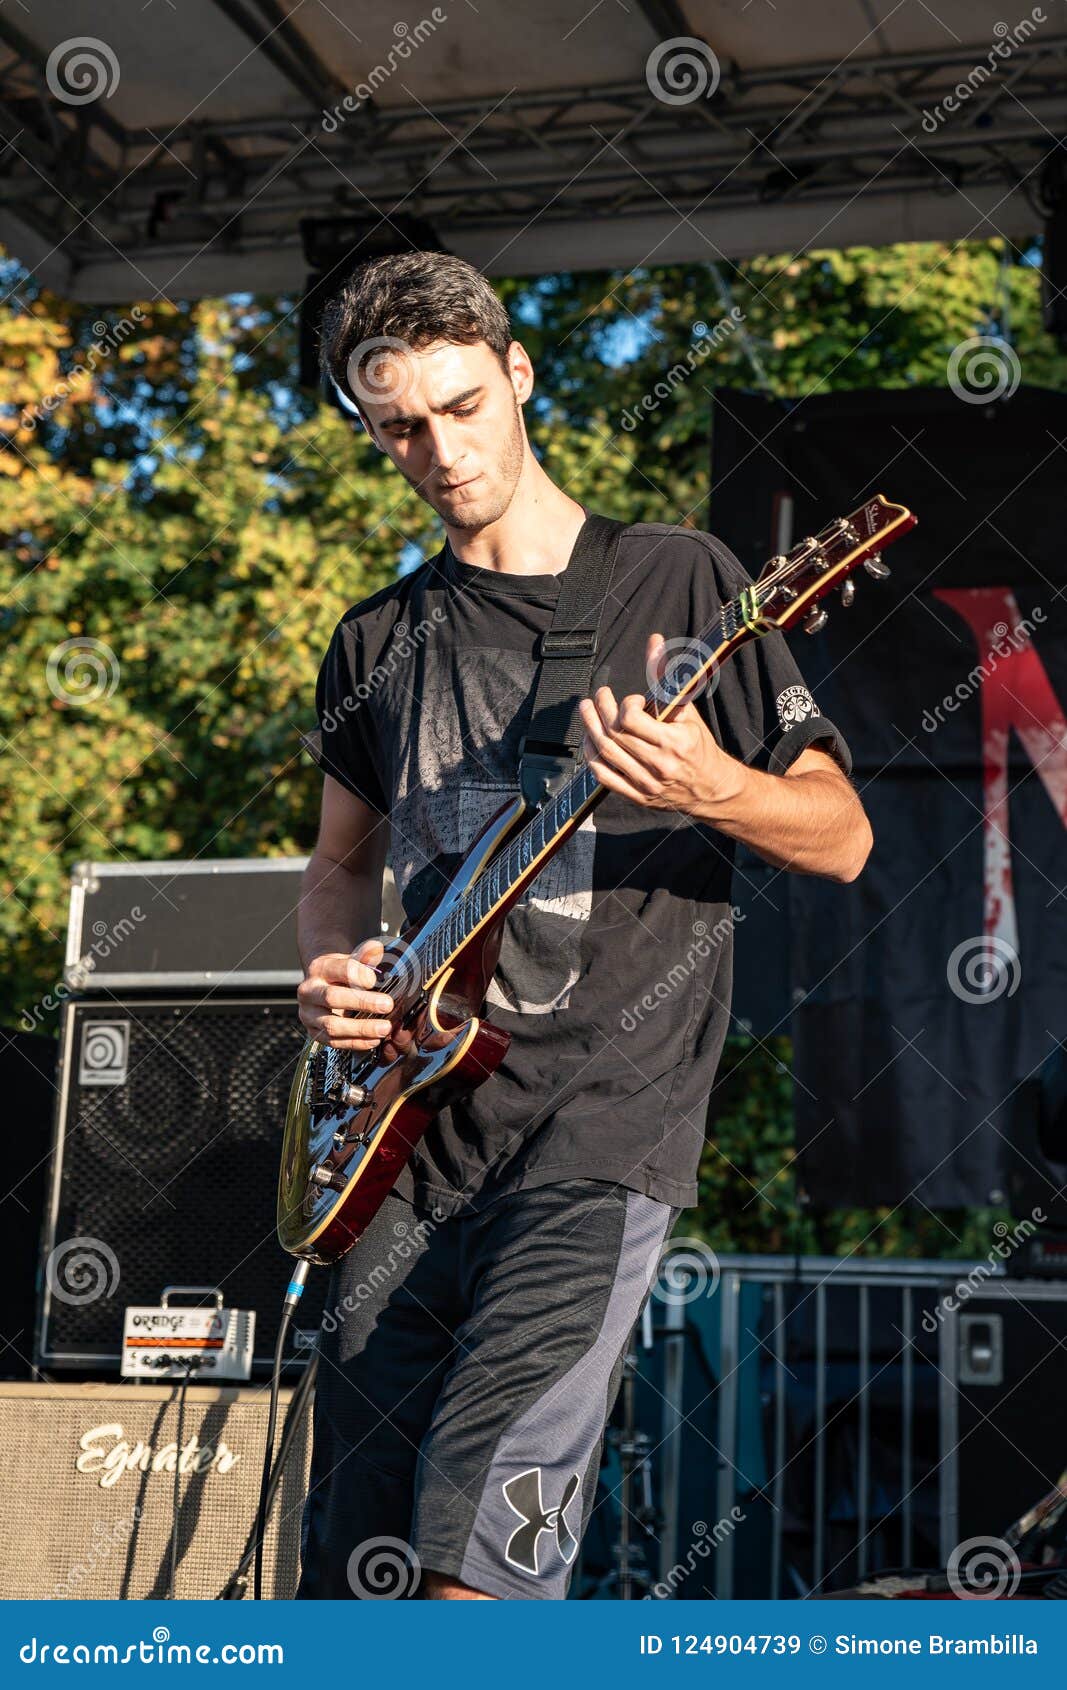 Waves in Autumn at Pollo Metal Fest BG 26-08-2018 Editorial Stock Image ...